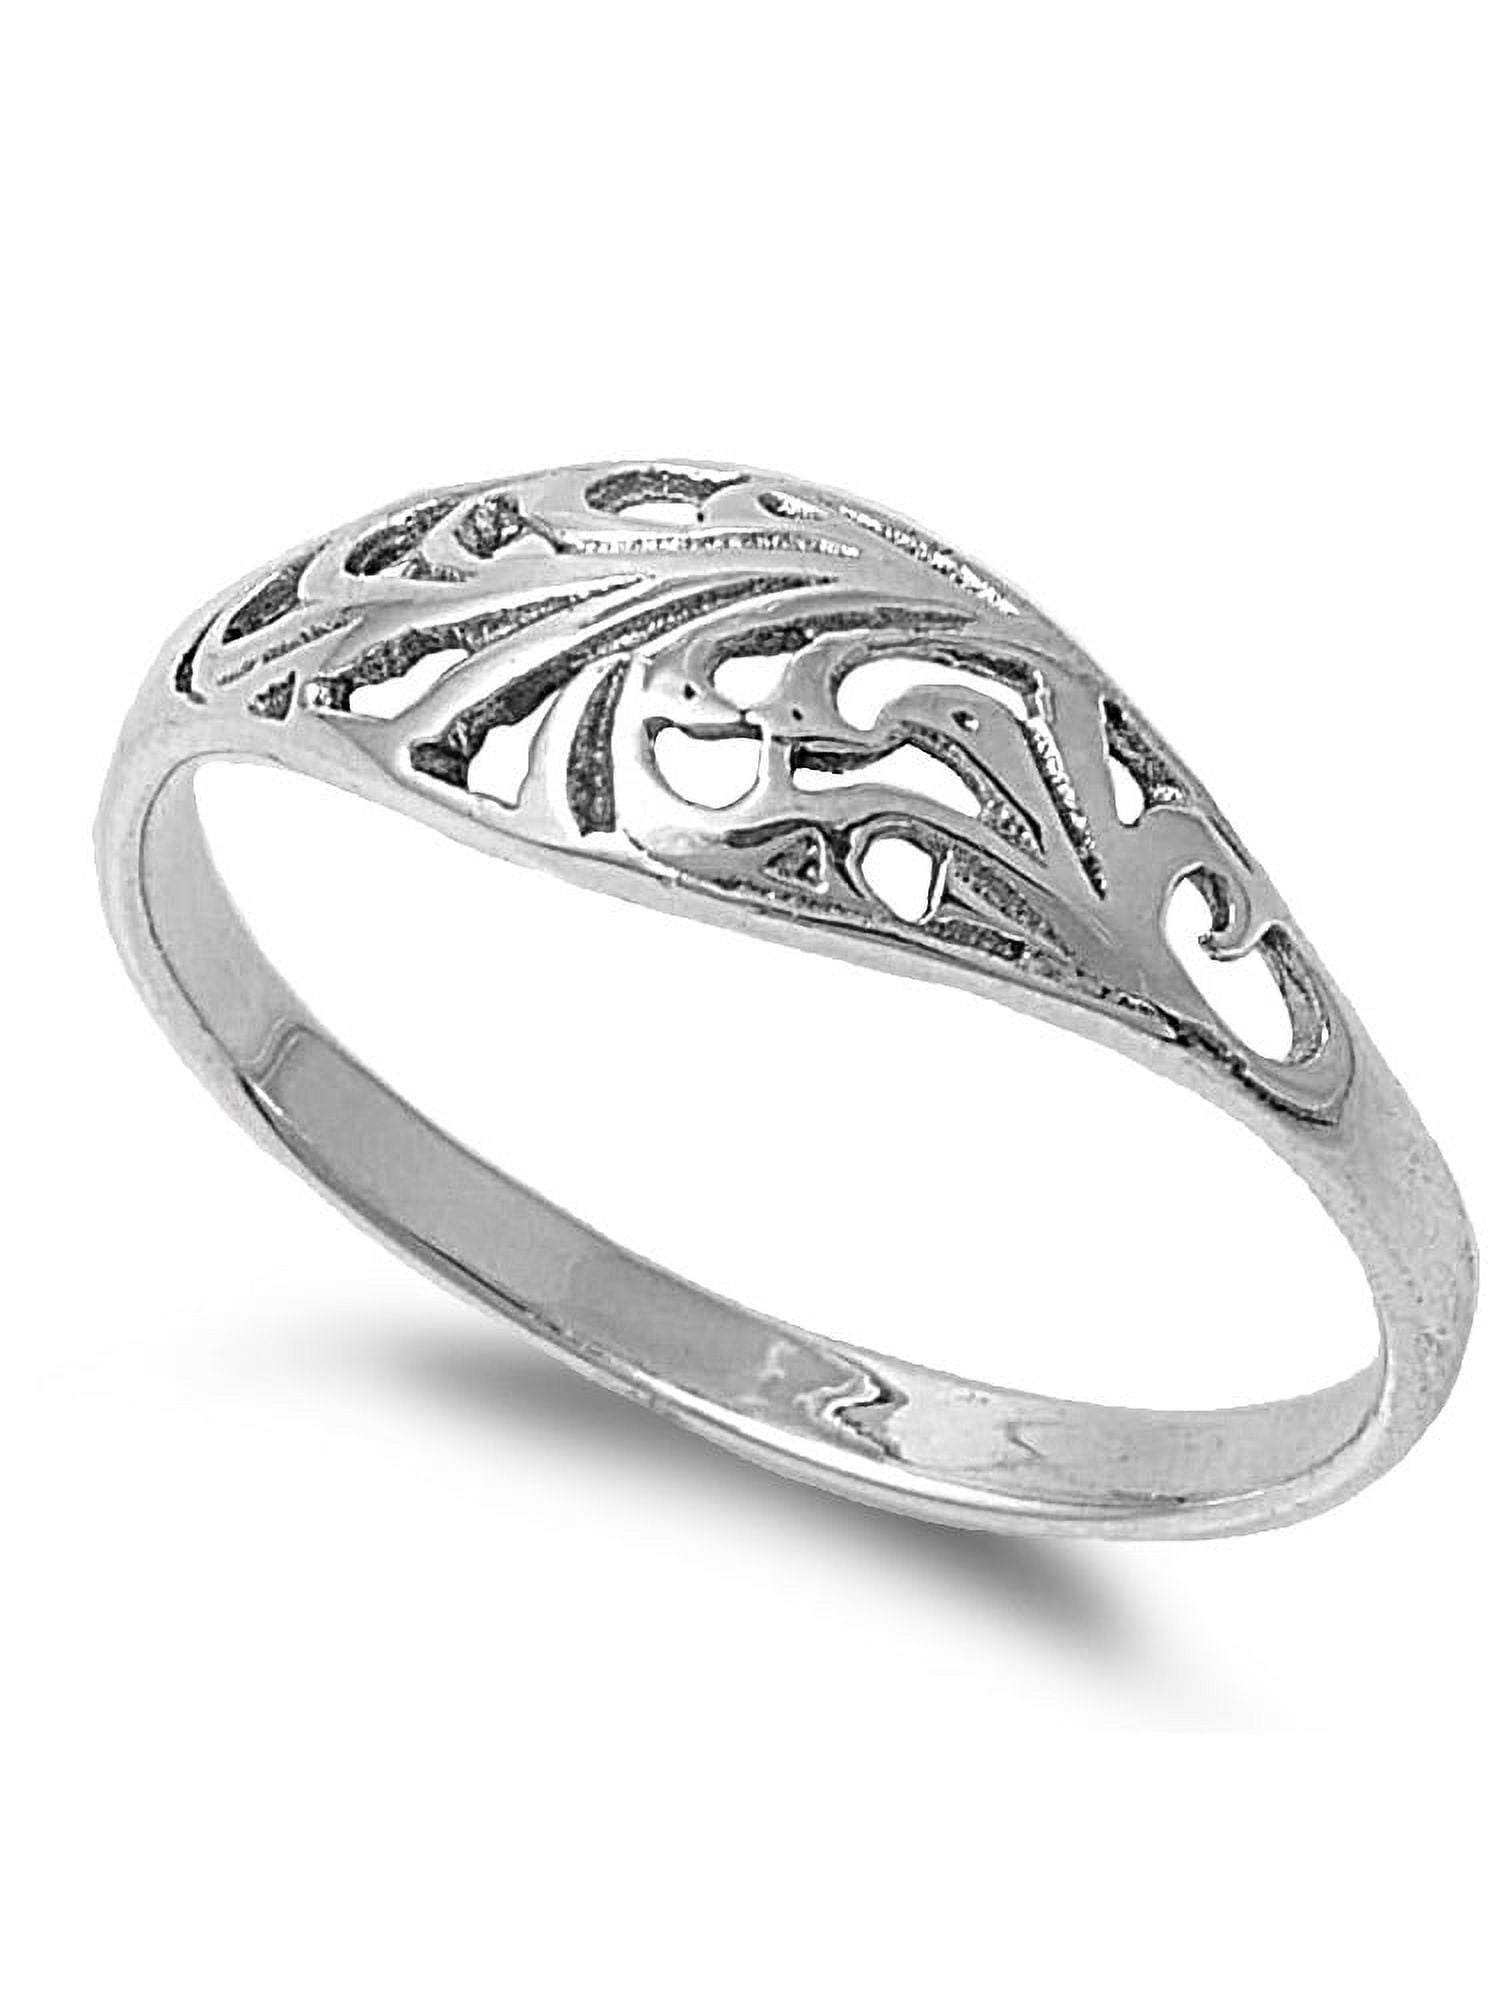 Silver Designer Ring, Infinity Ring, Solid Silver Ring, Statement Ring –  Adina Stone Jewelry